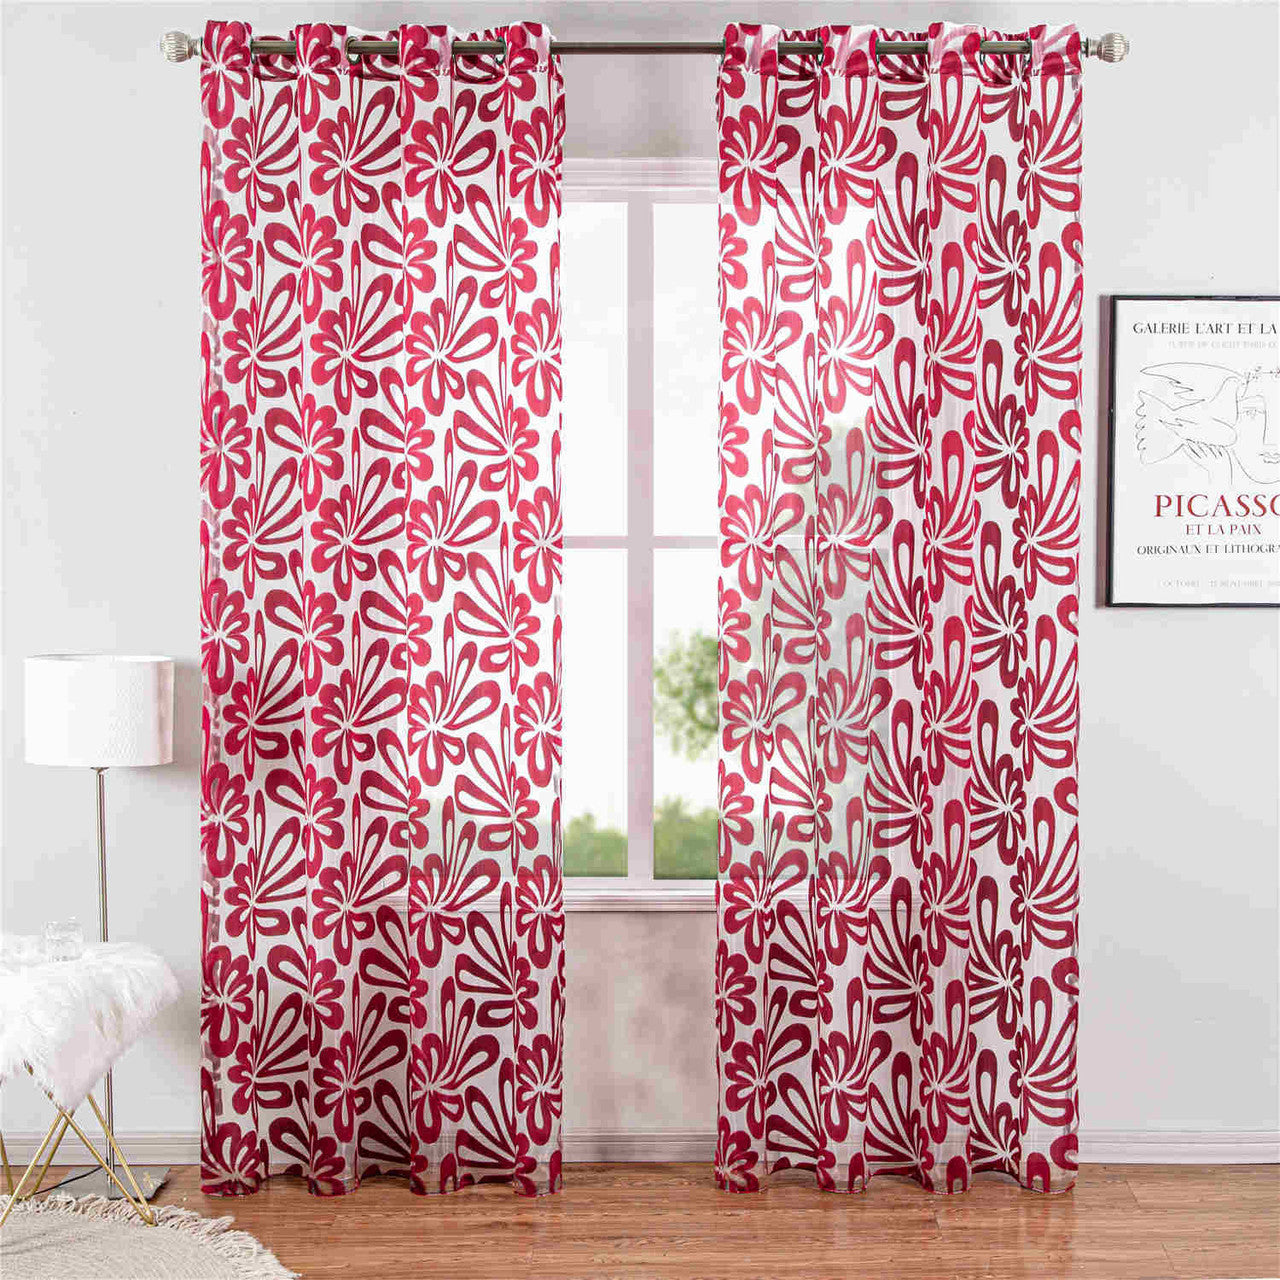 Tbilisi Red Window Sheer Curtains Panel by Dolce Mela